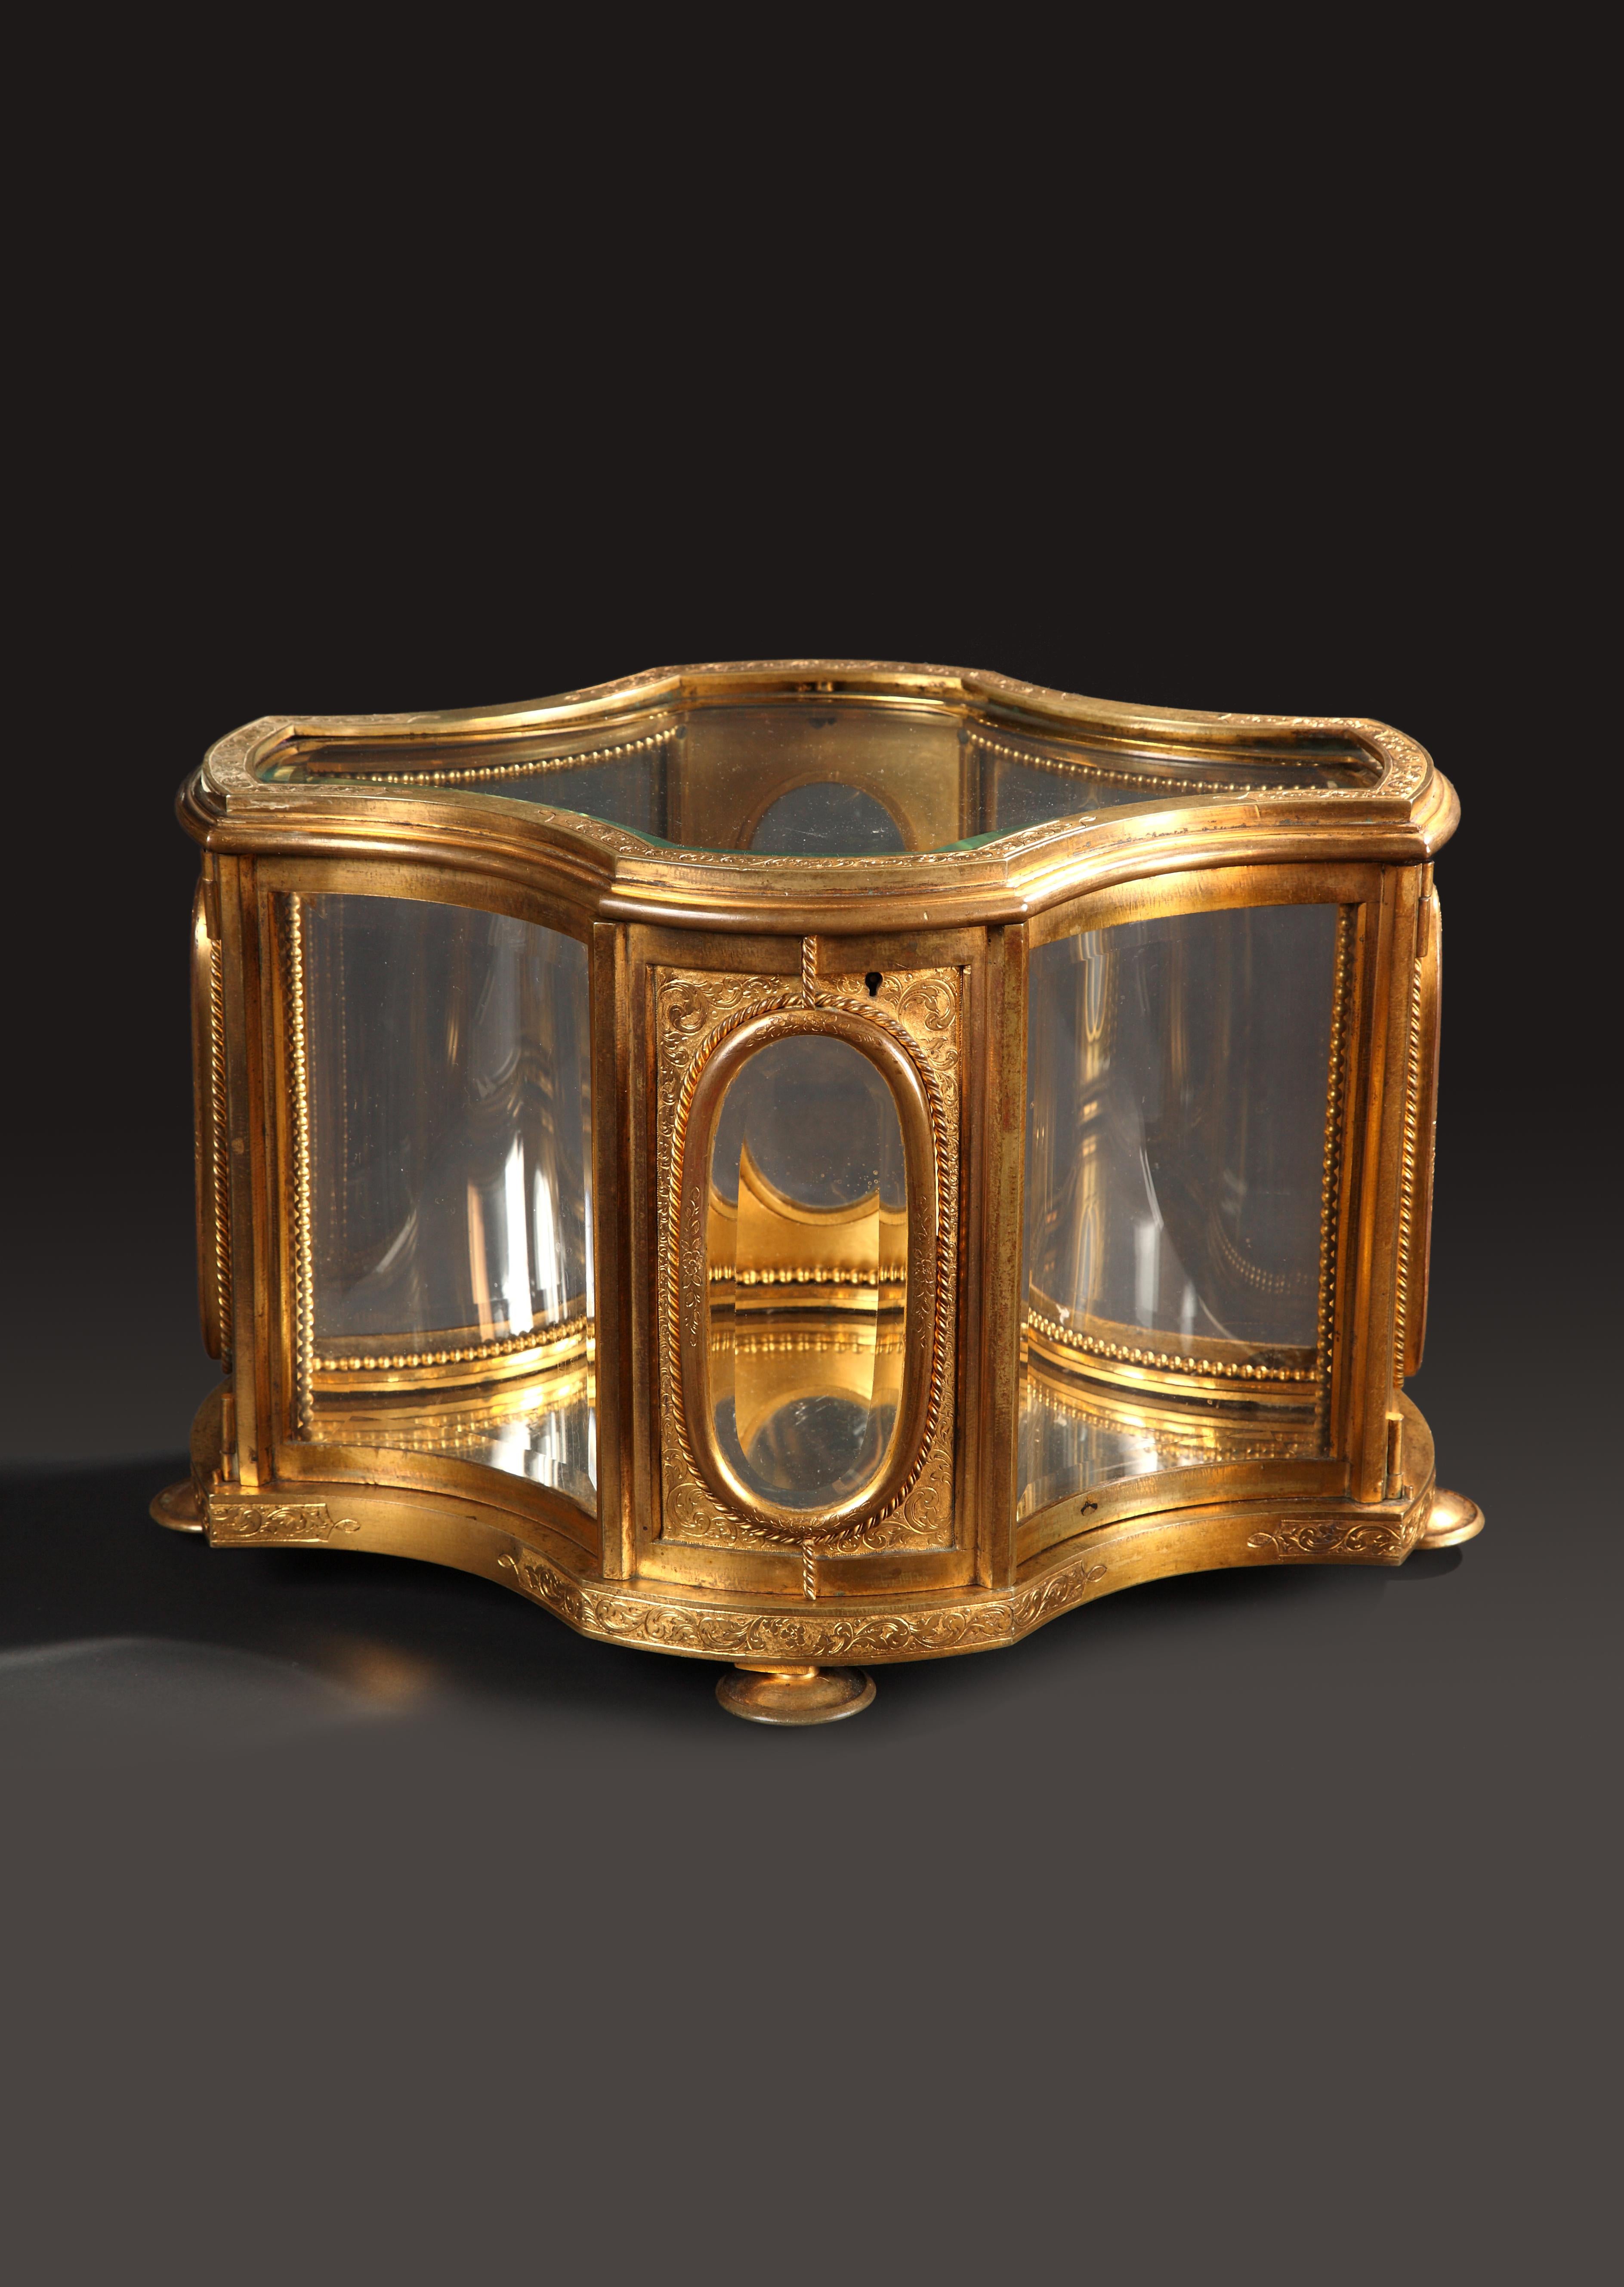 Important display case, with a mirror at the bottom, made in gilded bronze with engraved decoration, with bent and beveled crystal panels. Resting on four toupie feet. The top and the sides can be completely and widely opened.

L’Escalier de